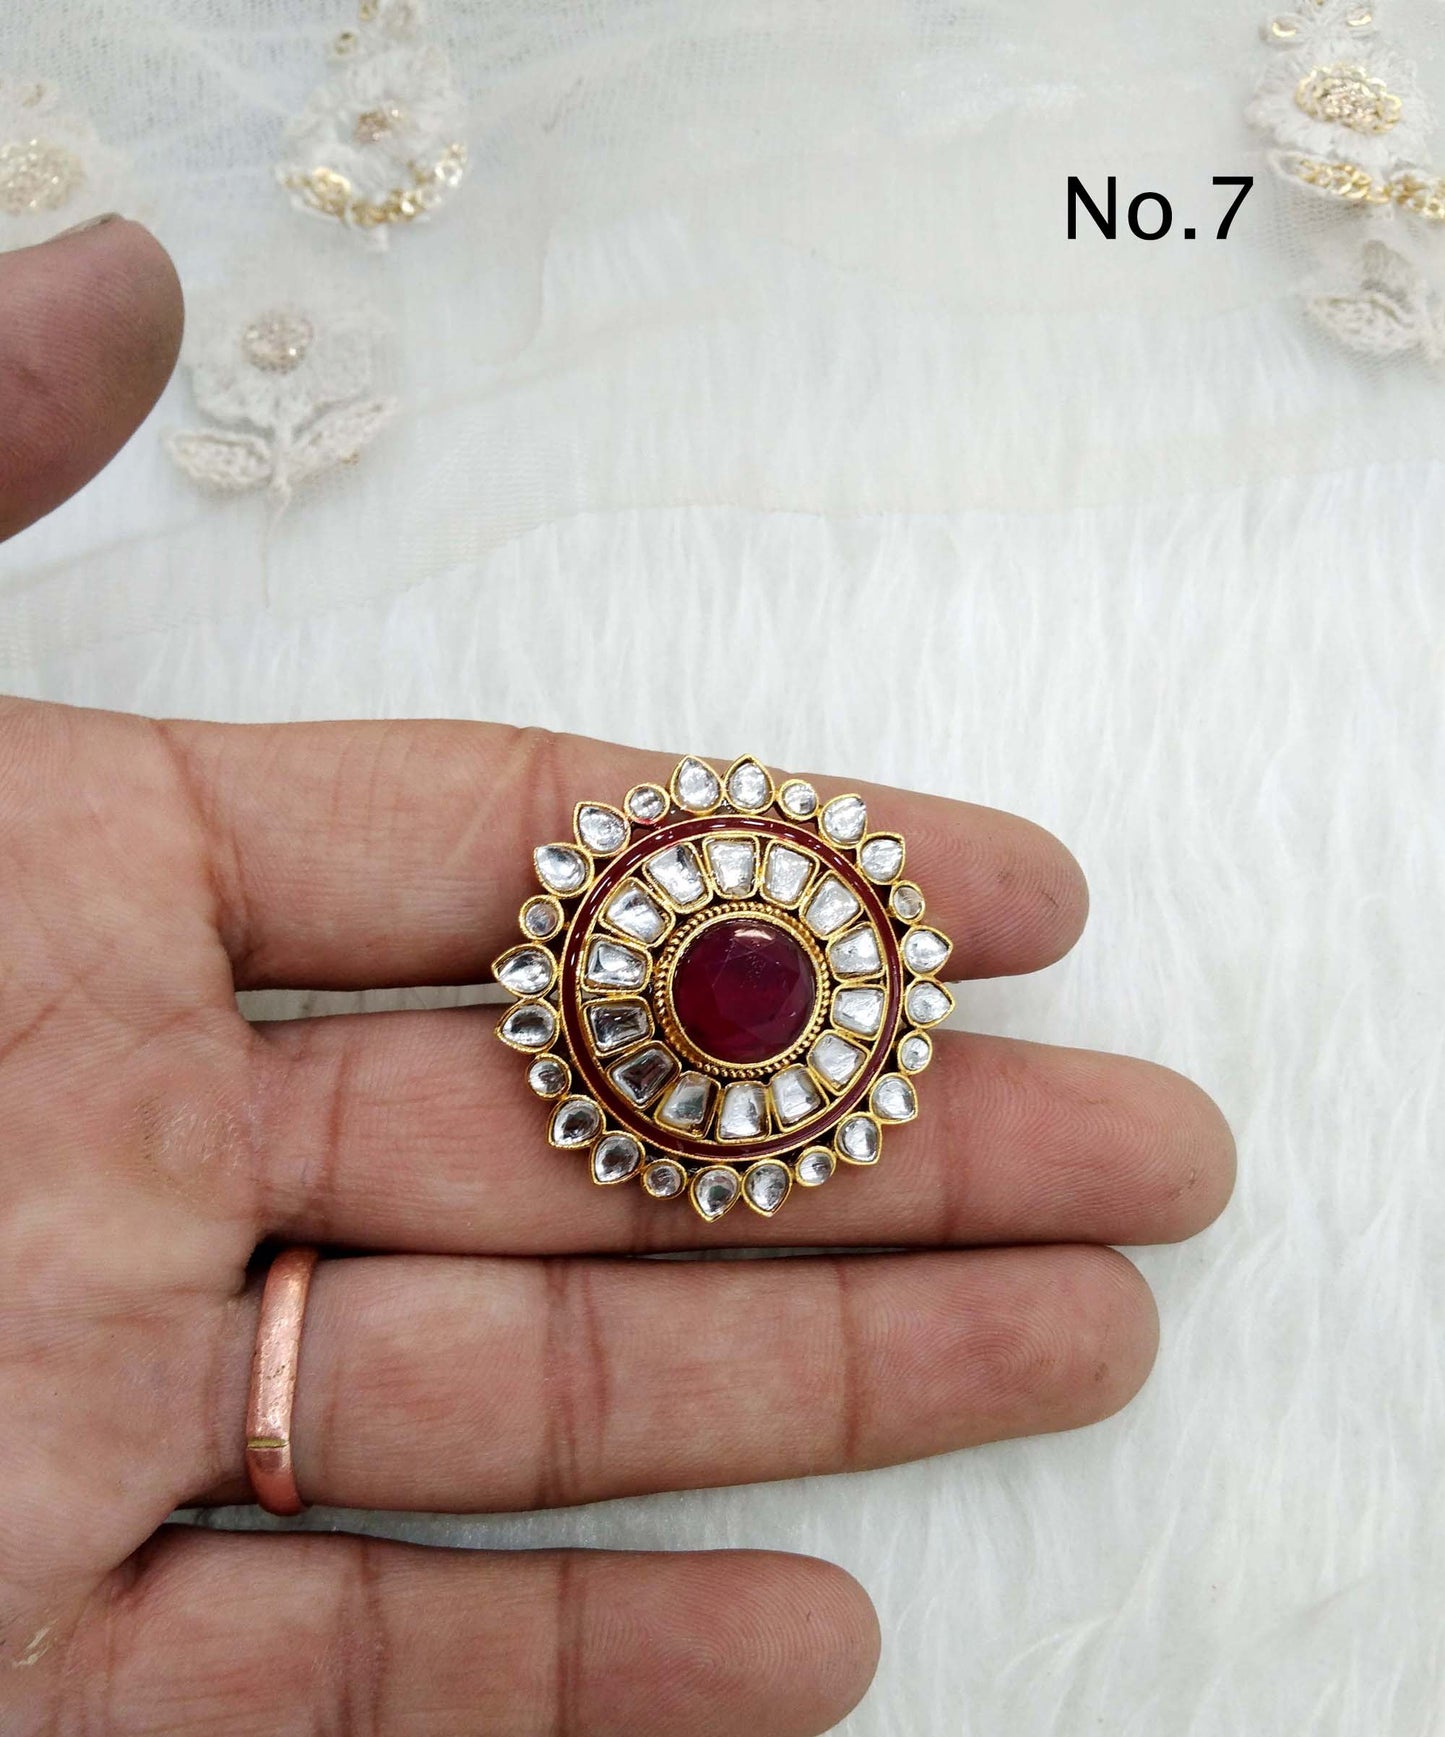 Online Indian Ring /Gold kundan finger rings Big round bridal ring hand accessory/limi